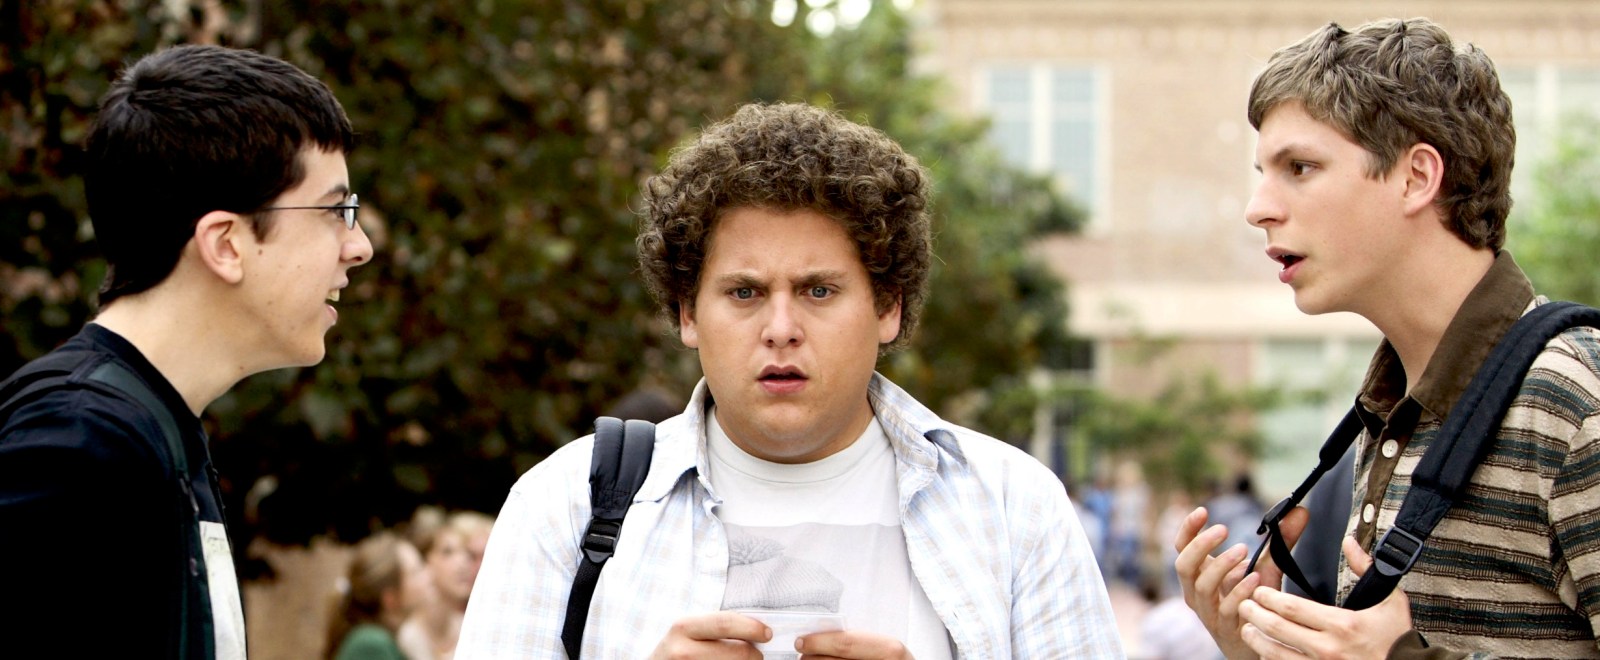 Jonah Hill Will Do Superbad 2 When He's 80 Years Old